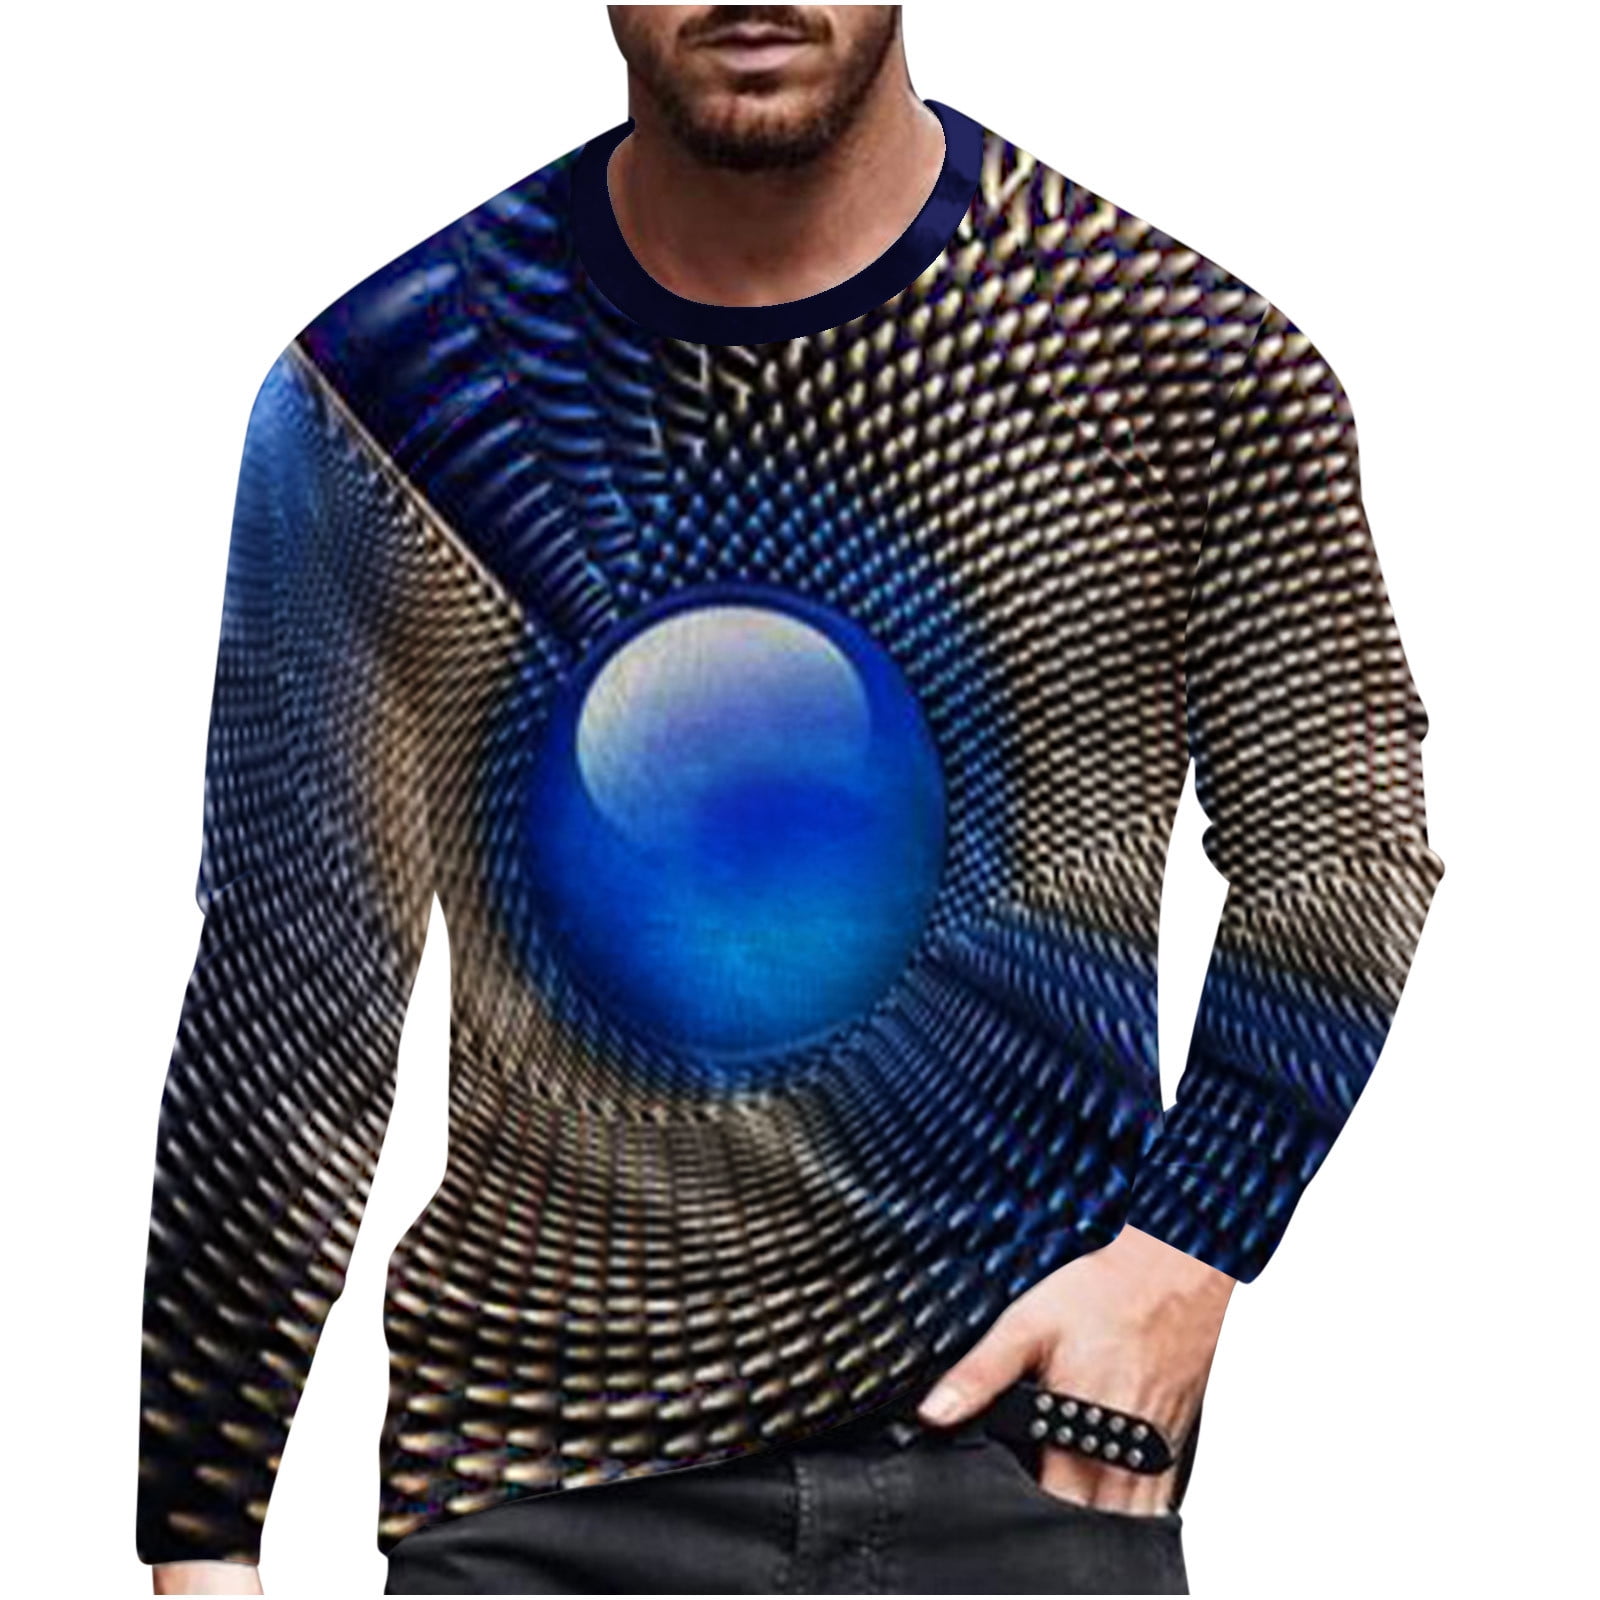 jsaierl Long Sleeve Shirts for Men 3D Optical Illusion Graphic Tee Street  Fashion Crew Neck Tops Novelty Designer T Shirts 